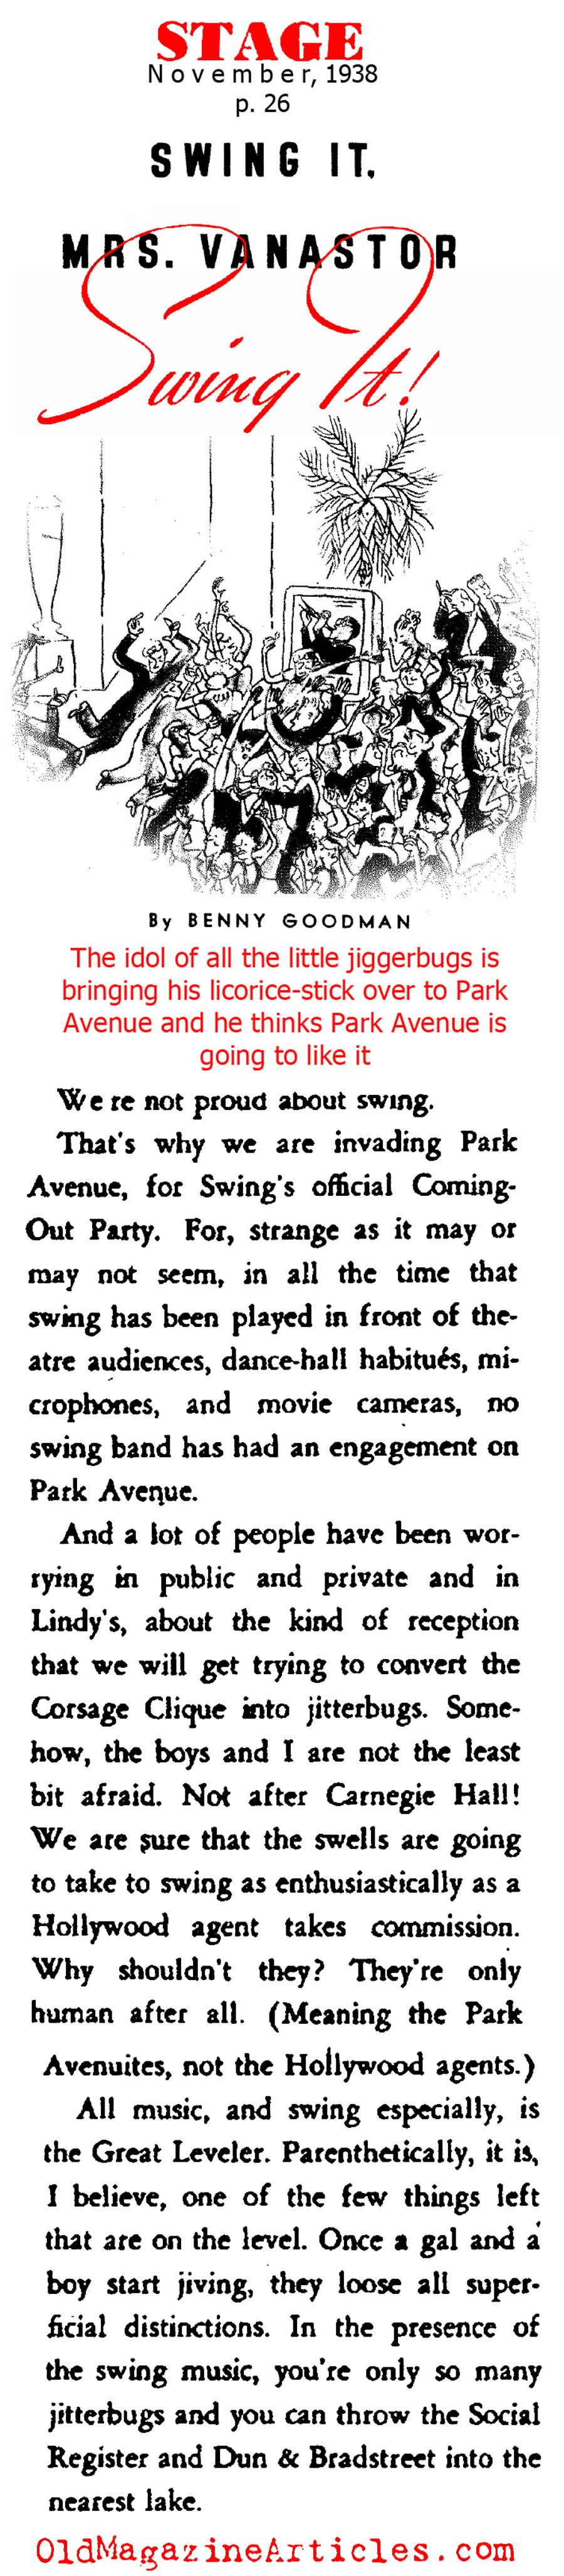 Benny Goodman, The King of Swing, on Park Avenue  (Stage Magazine, 1938)